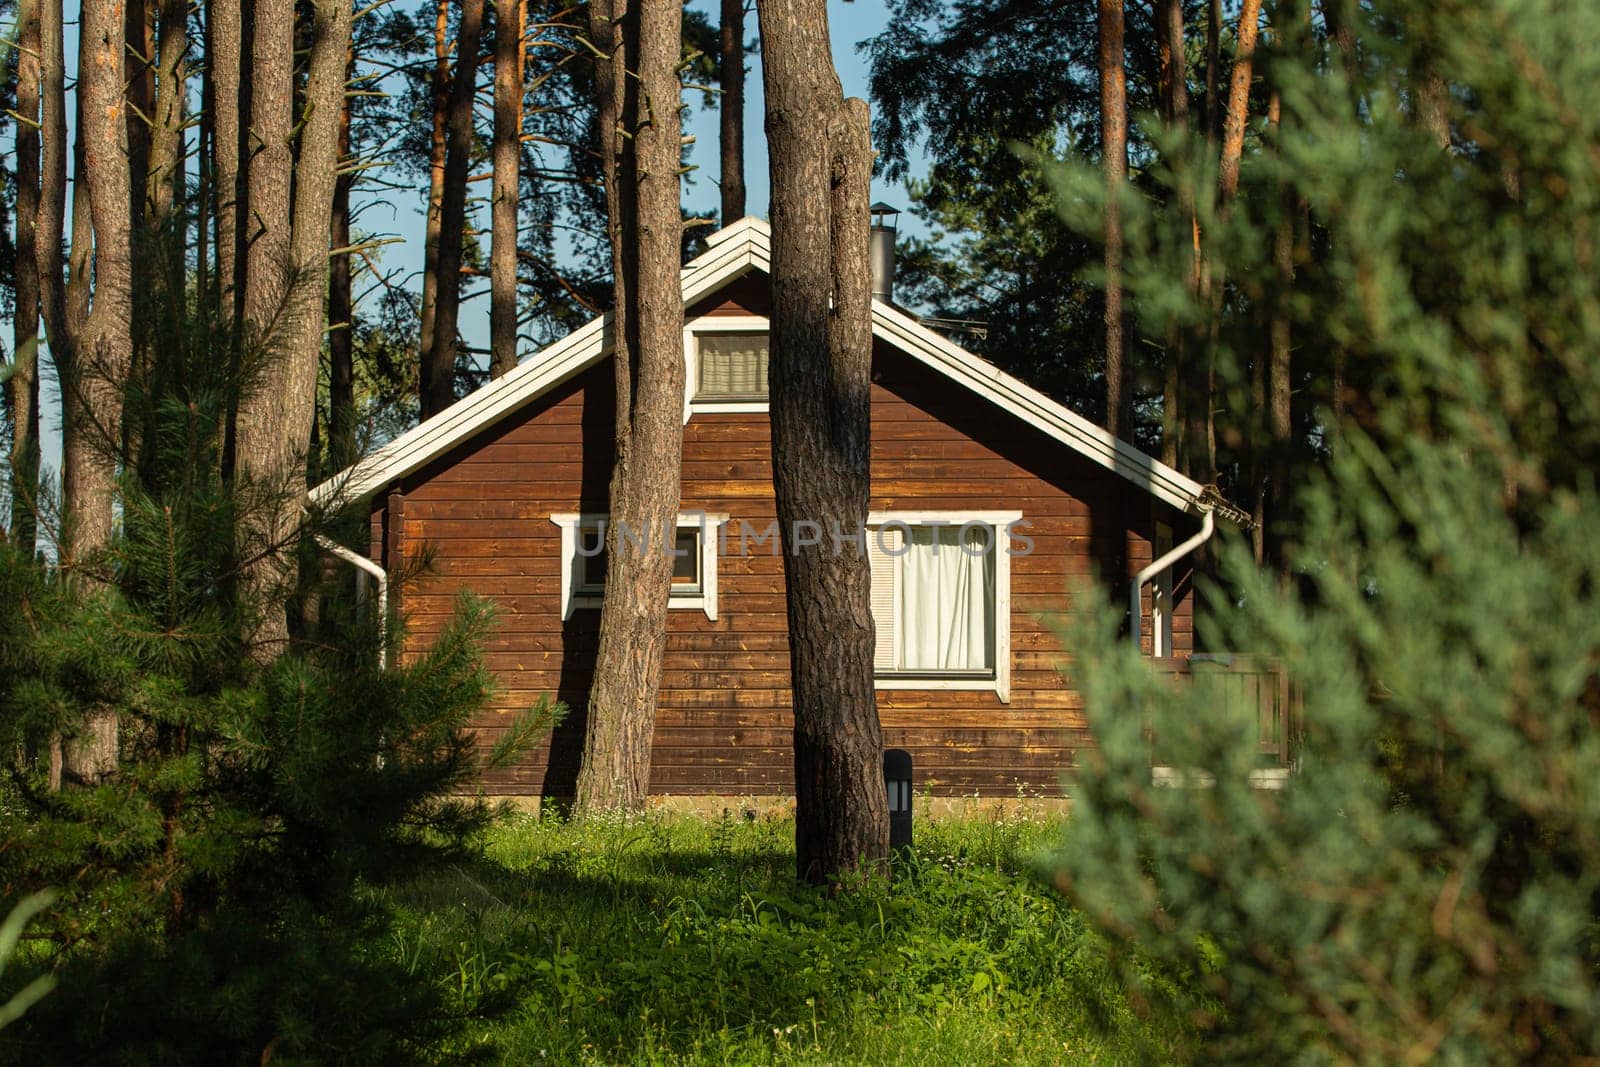 Cozy small wooden house cottage in a pines forest in summer. Rustic tranquil cabin retreat on nature rural area by its_al_dente